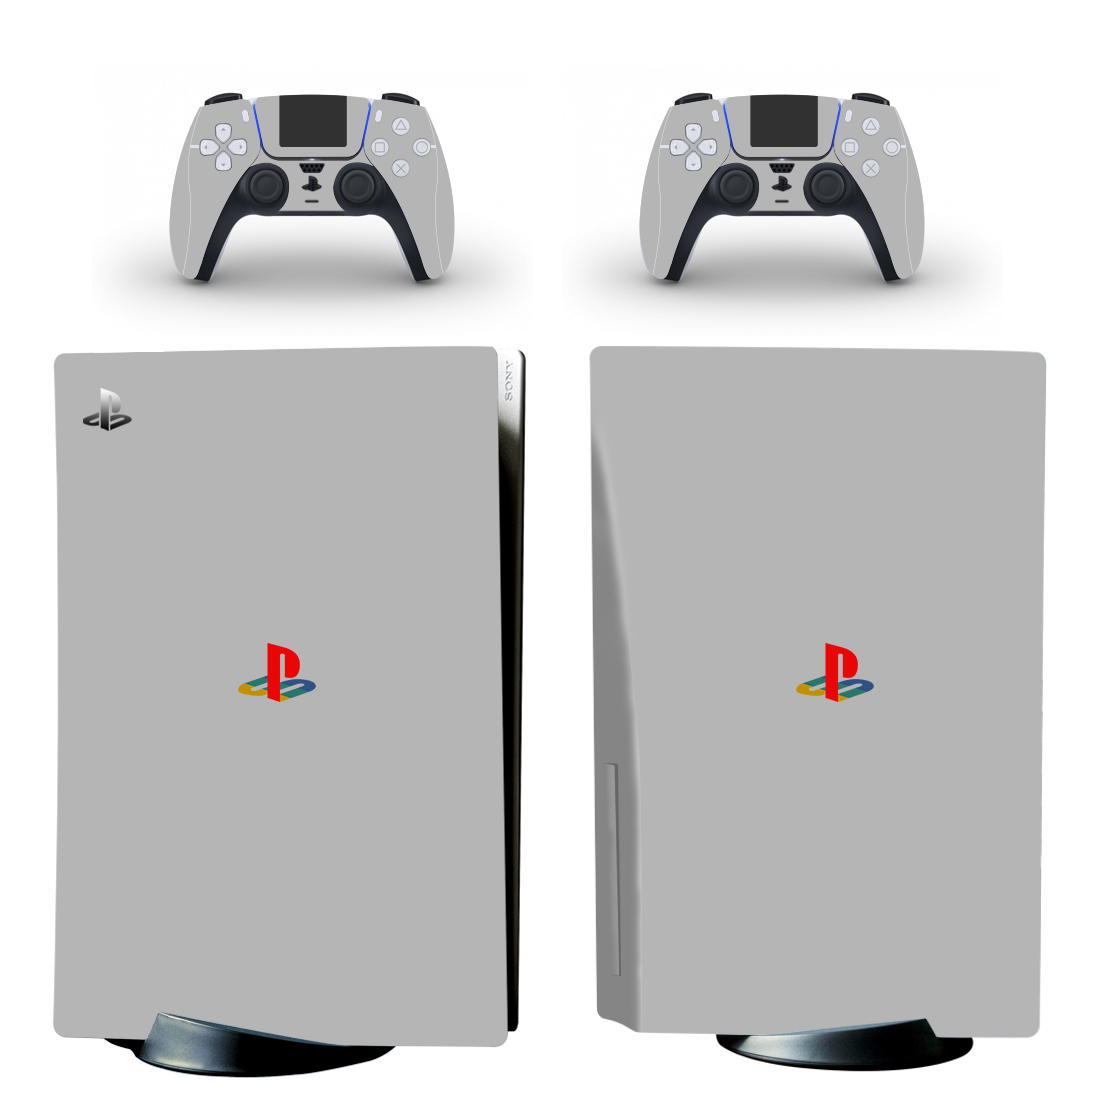 Playstation Symbol On Gray PS5 Skin Sticker Decal